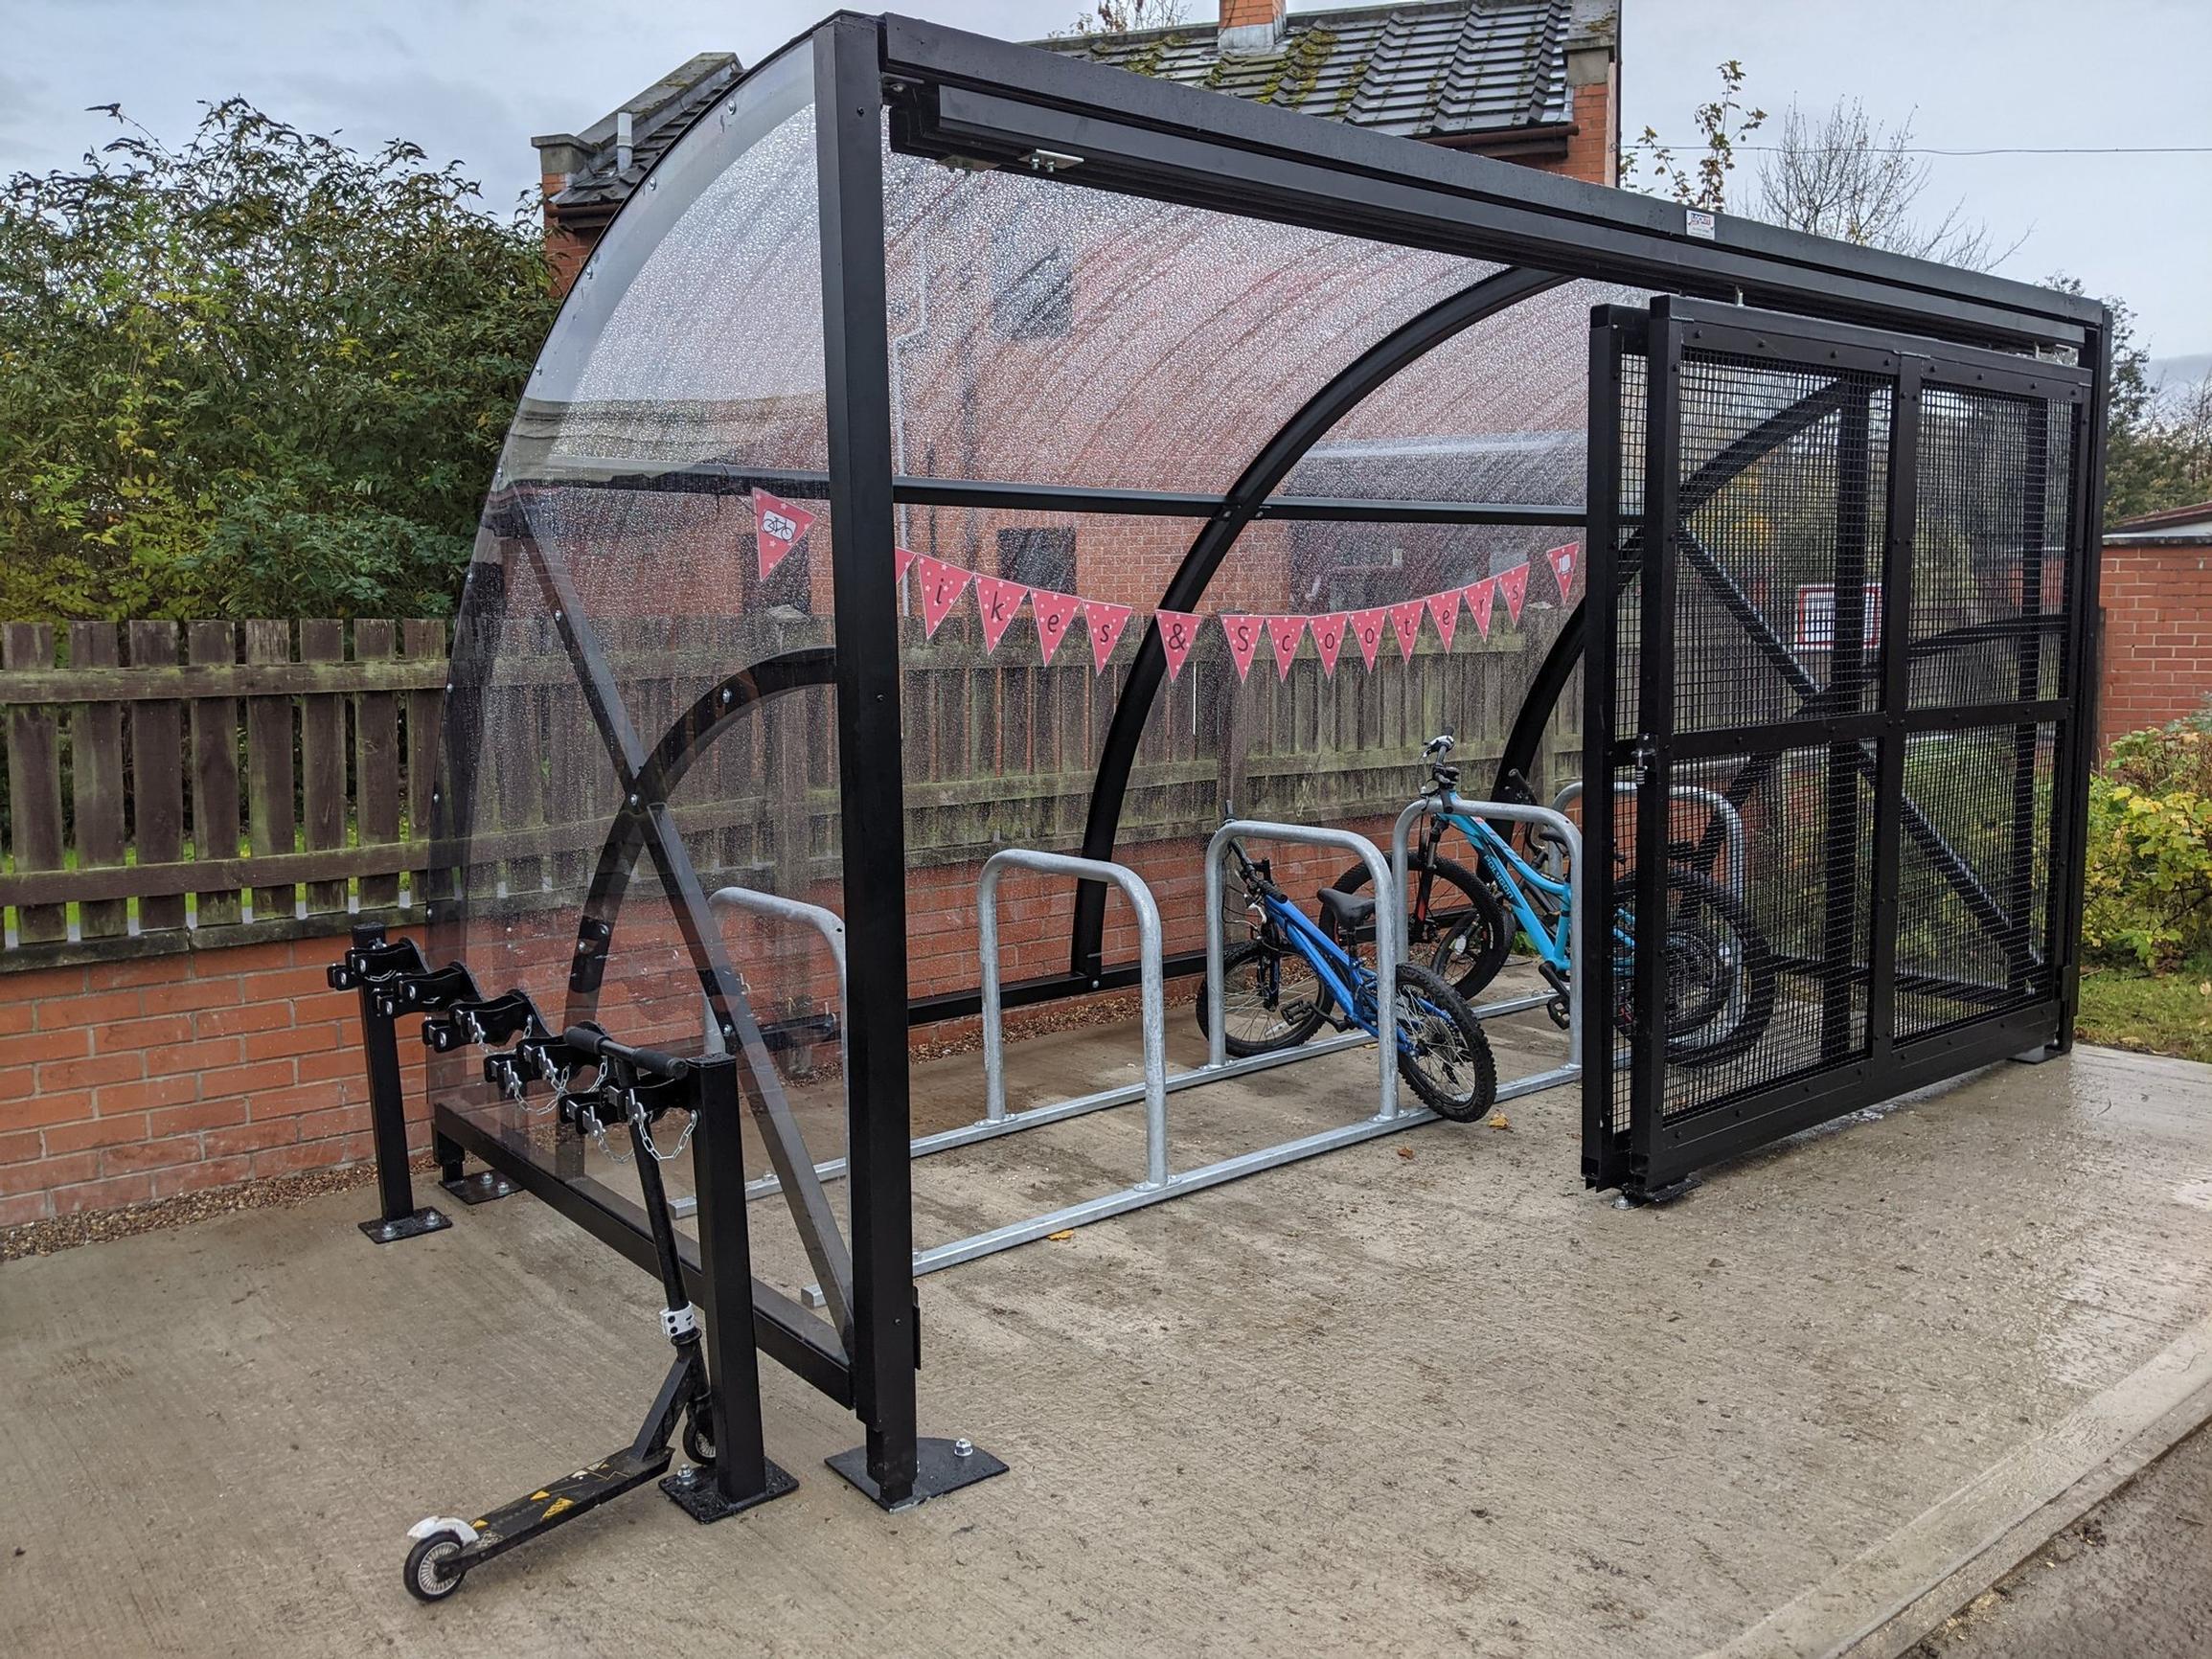 Cycle shelter at Armley Park Primary School